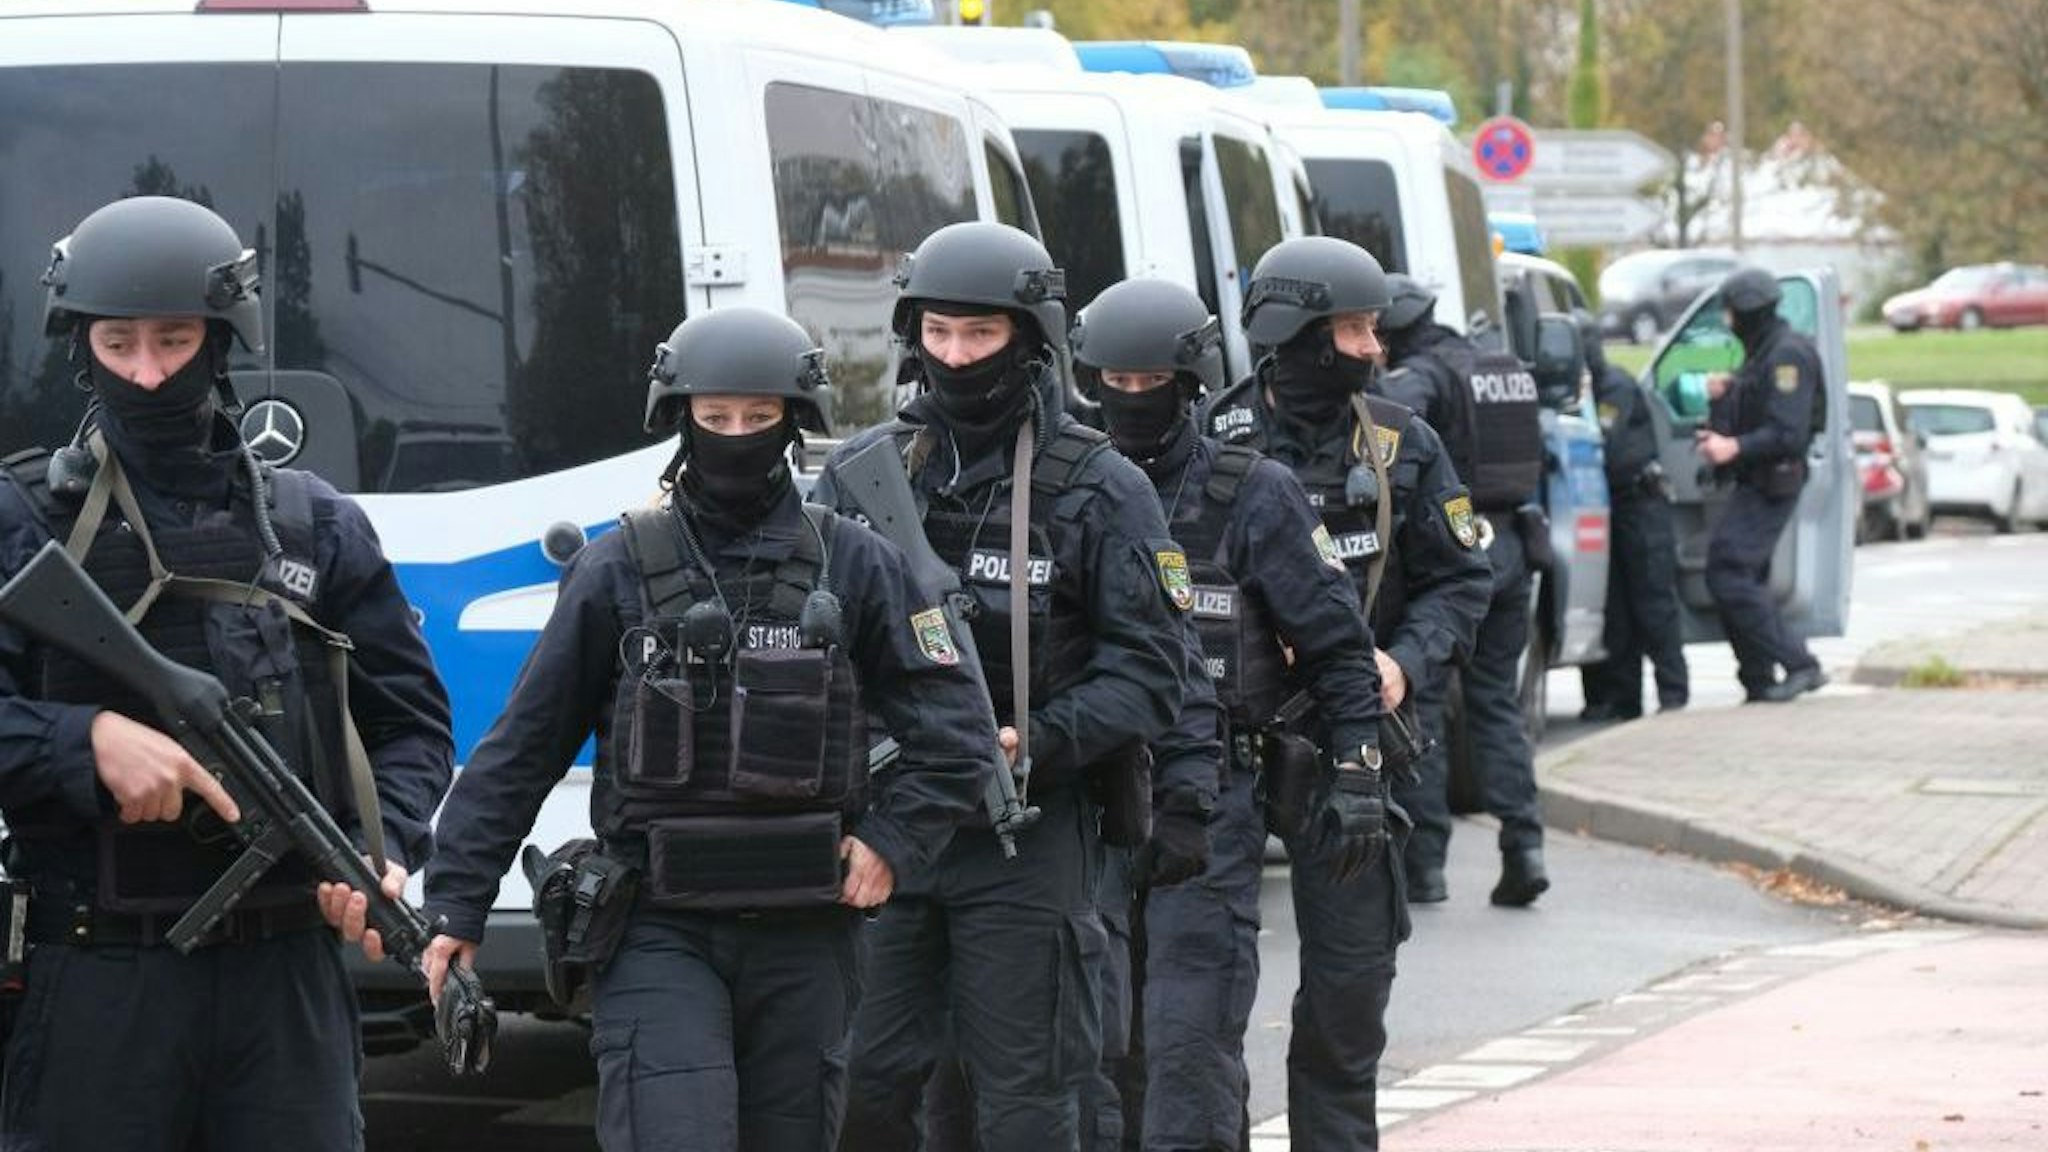 Policemen walk through a street close to the site of a shooting in Halle an der Saale, eastern Germany, on October 9, 2019. - At least two people were killed in a shooting on a street in the German city of Halle, police said, adding that the perpetrators were on the run. "Early indications show that two people were killed in Halle. Several shots were fired. The suspected perpetrators fled in a car," said police on Twitter, urging residents in the area to stay indoors. (Photo by Sebastian Willnow / dpa / AFP) / Germany OUT (Photo by SEBASTIAN WILLNOW/dpa/AFP via Getty Images)